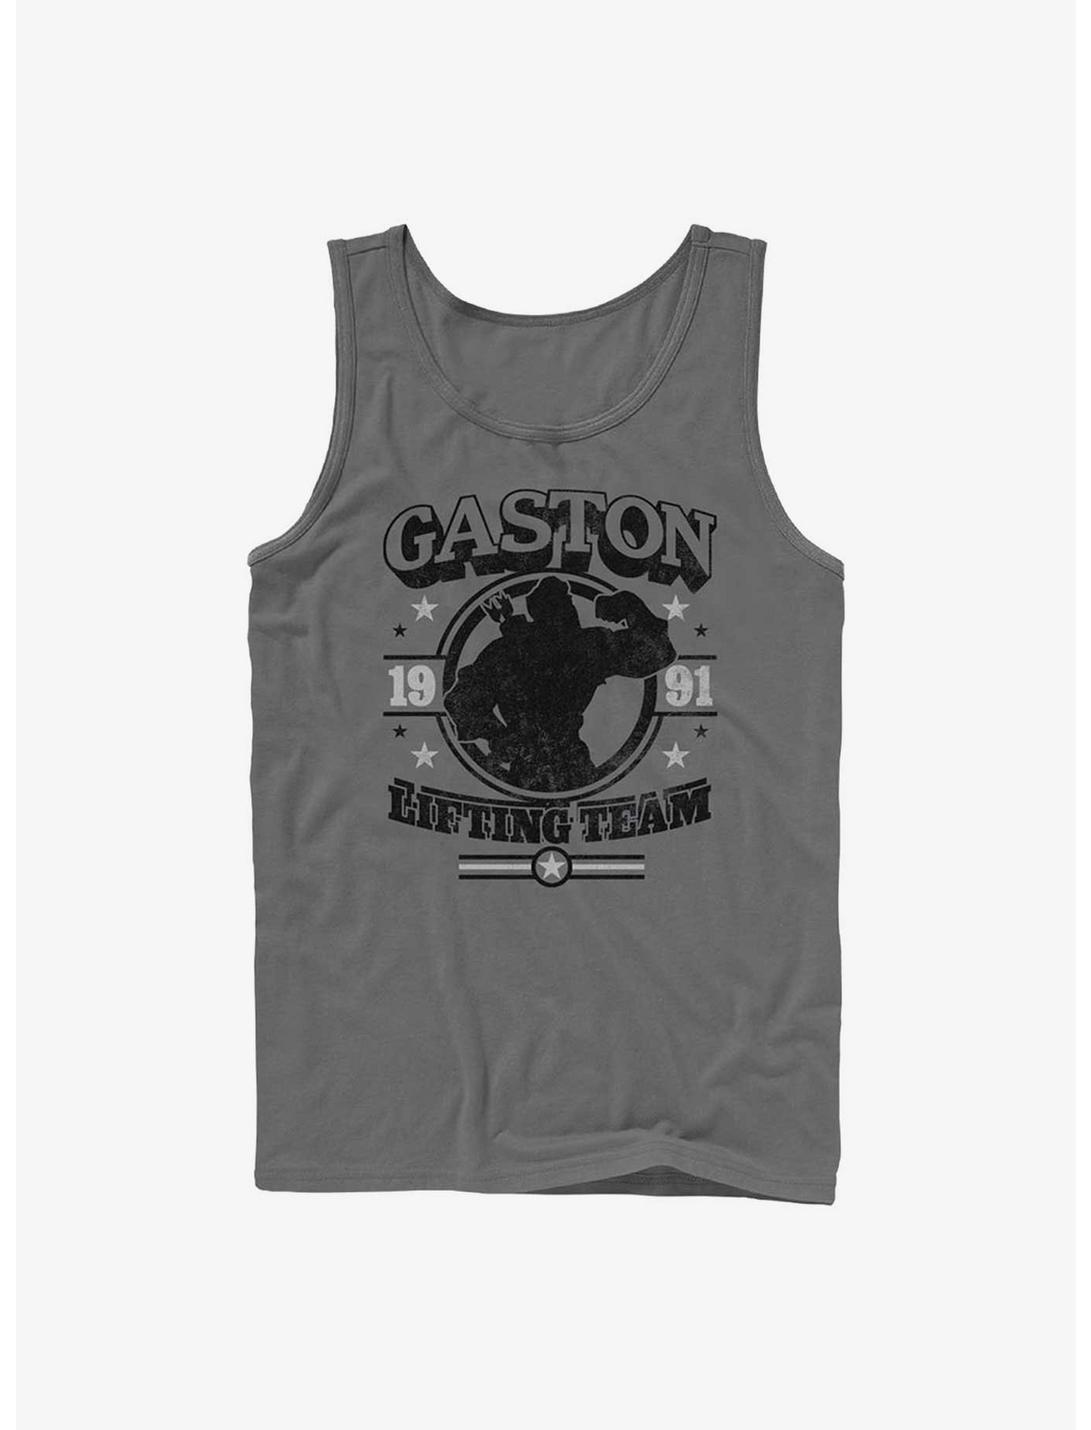 Disney Beauty and the Beast Gaston Gym Tank, CHARCOAL, hi-res